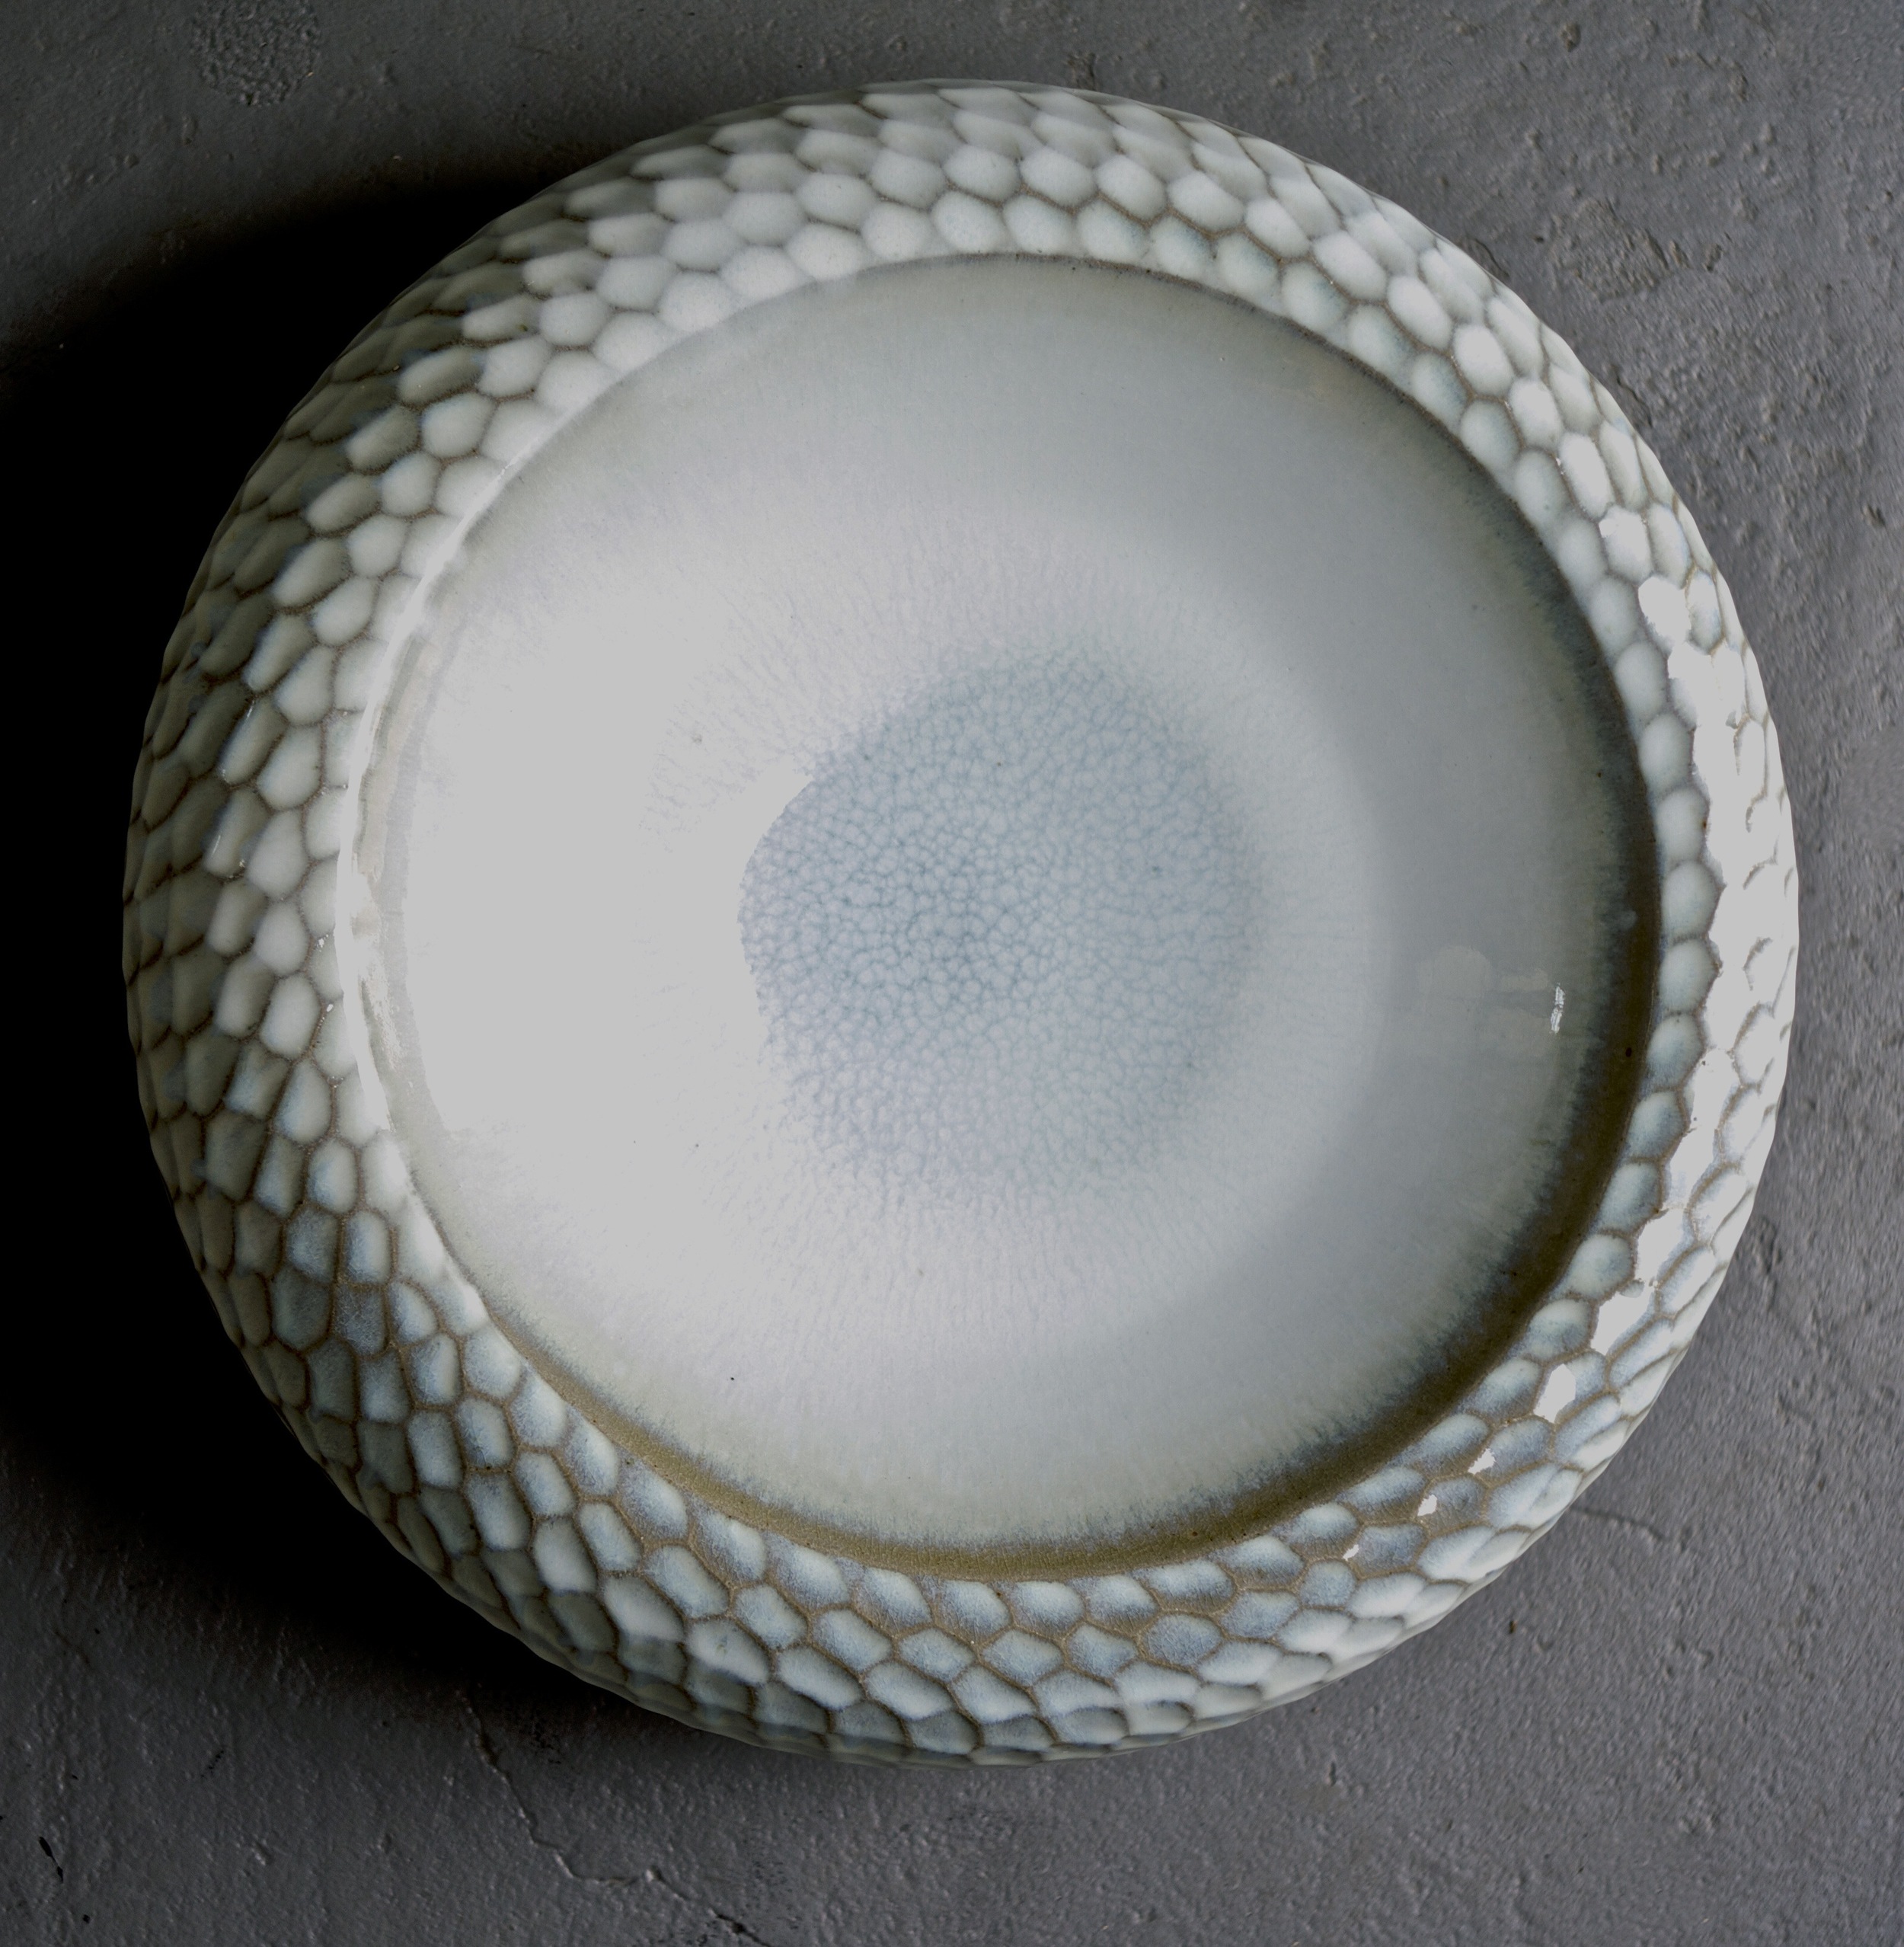  Thrown hollow form with faceted sides.  stoneware  450mm W  2011 